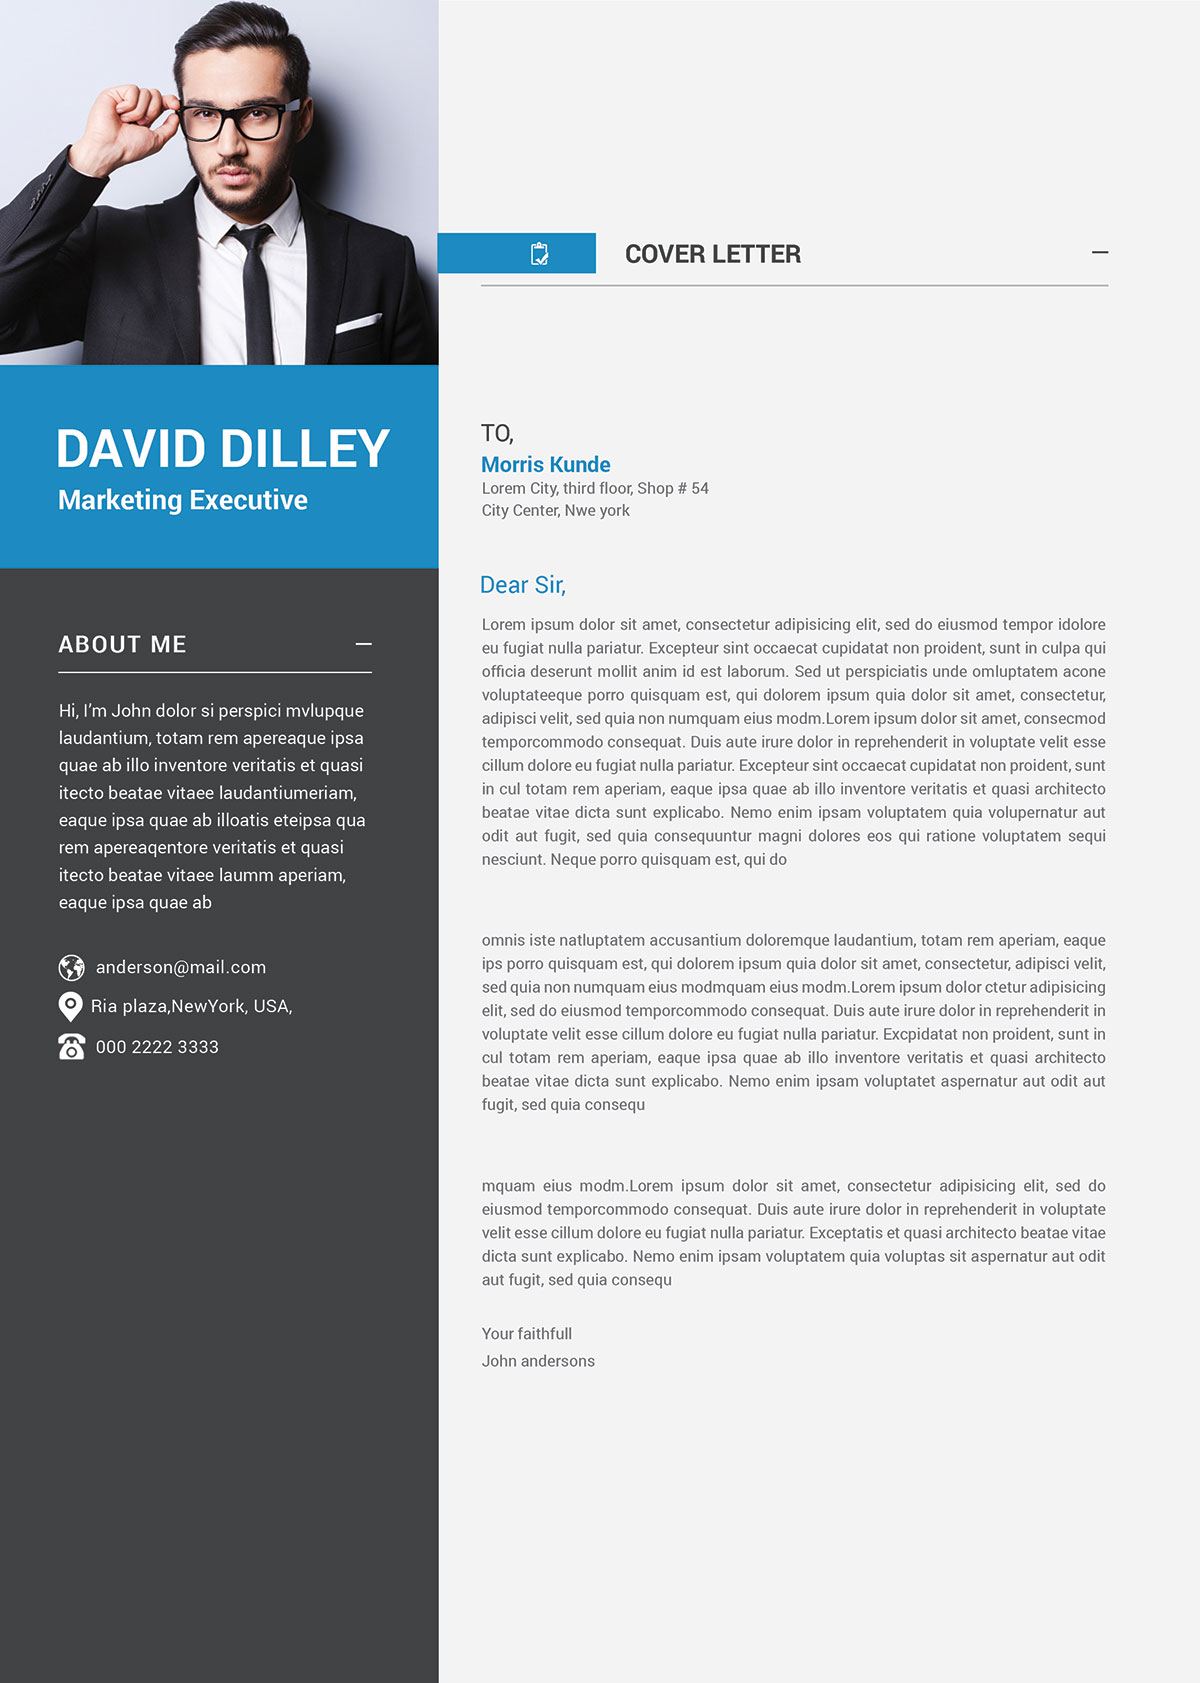 Free Professional CV Template & Cover Letter for Marketing Executives Good Resume